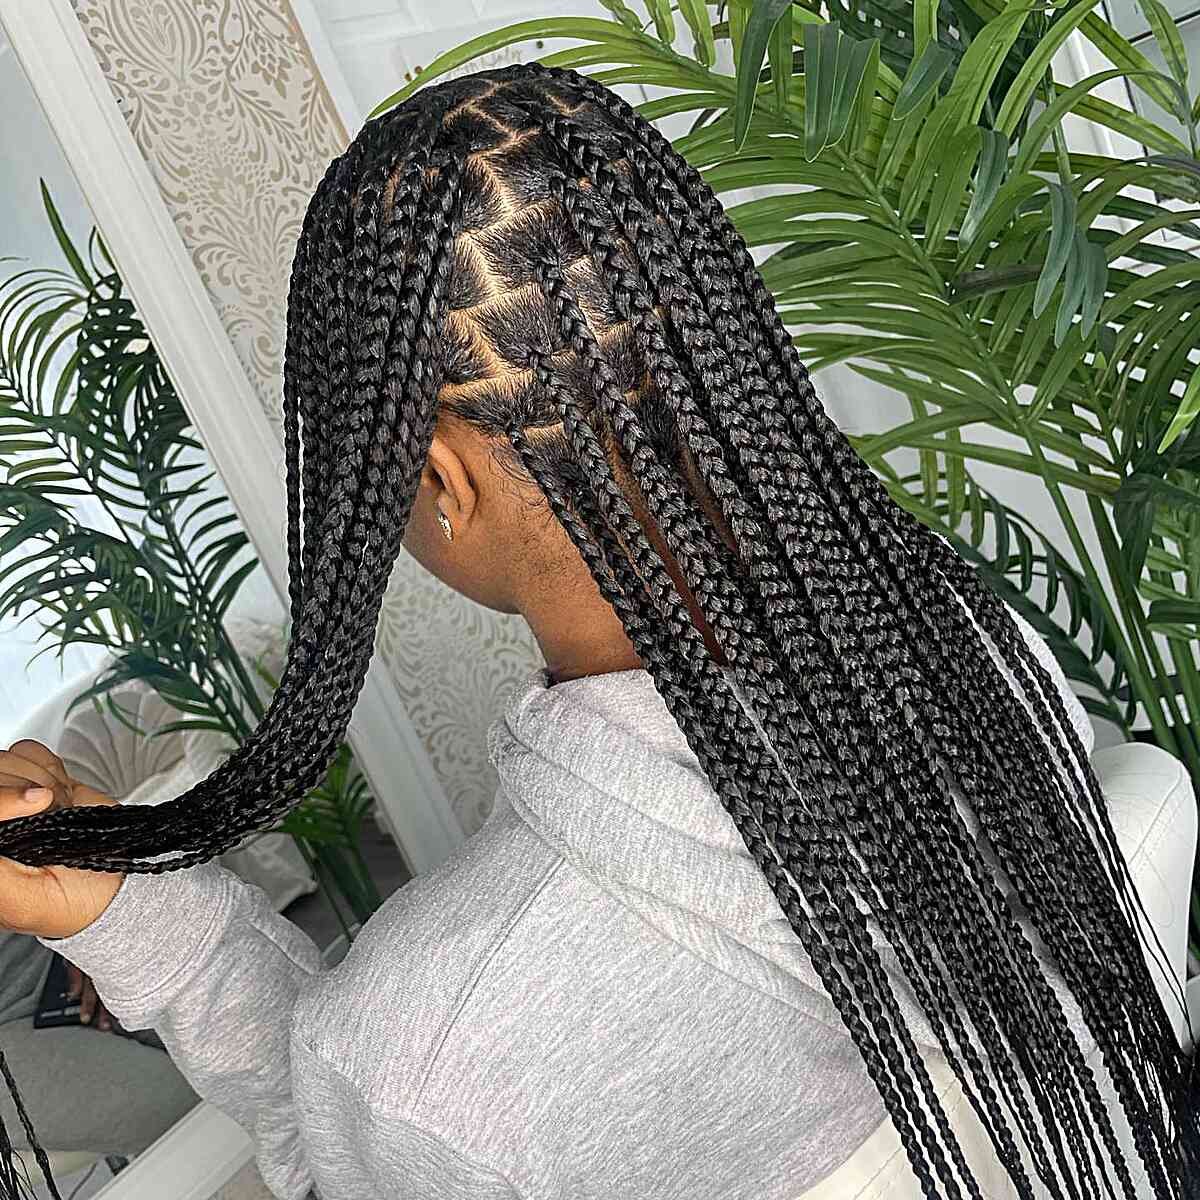 Long and Black Medium-Sized Knotless Braids with Sleek Baby Hairs